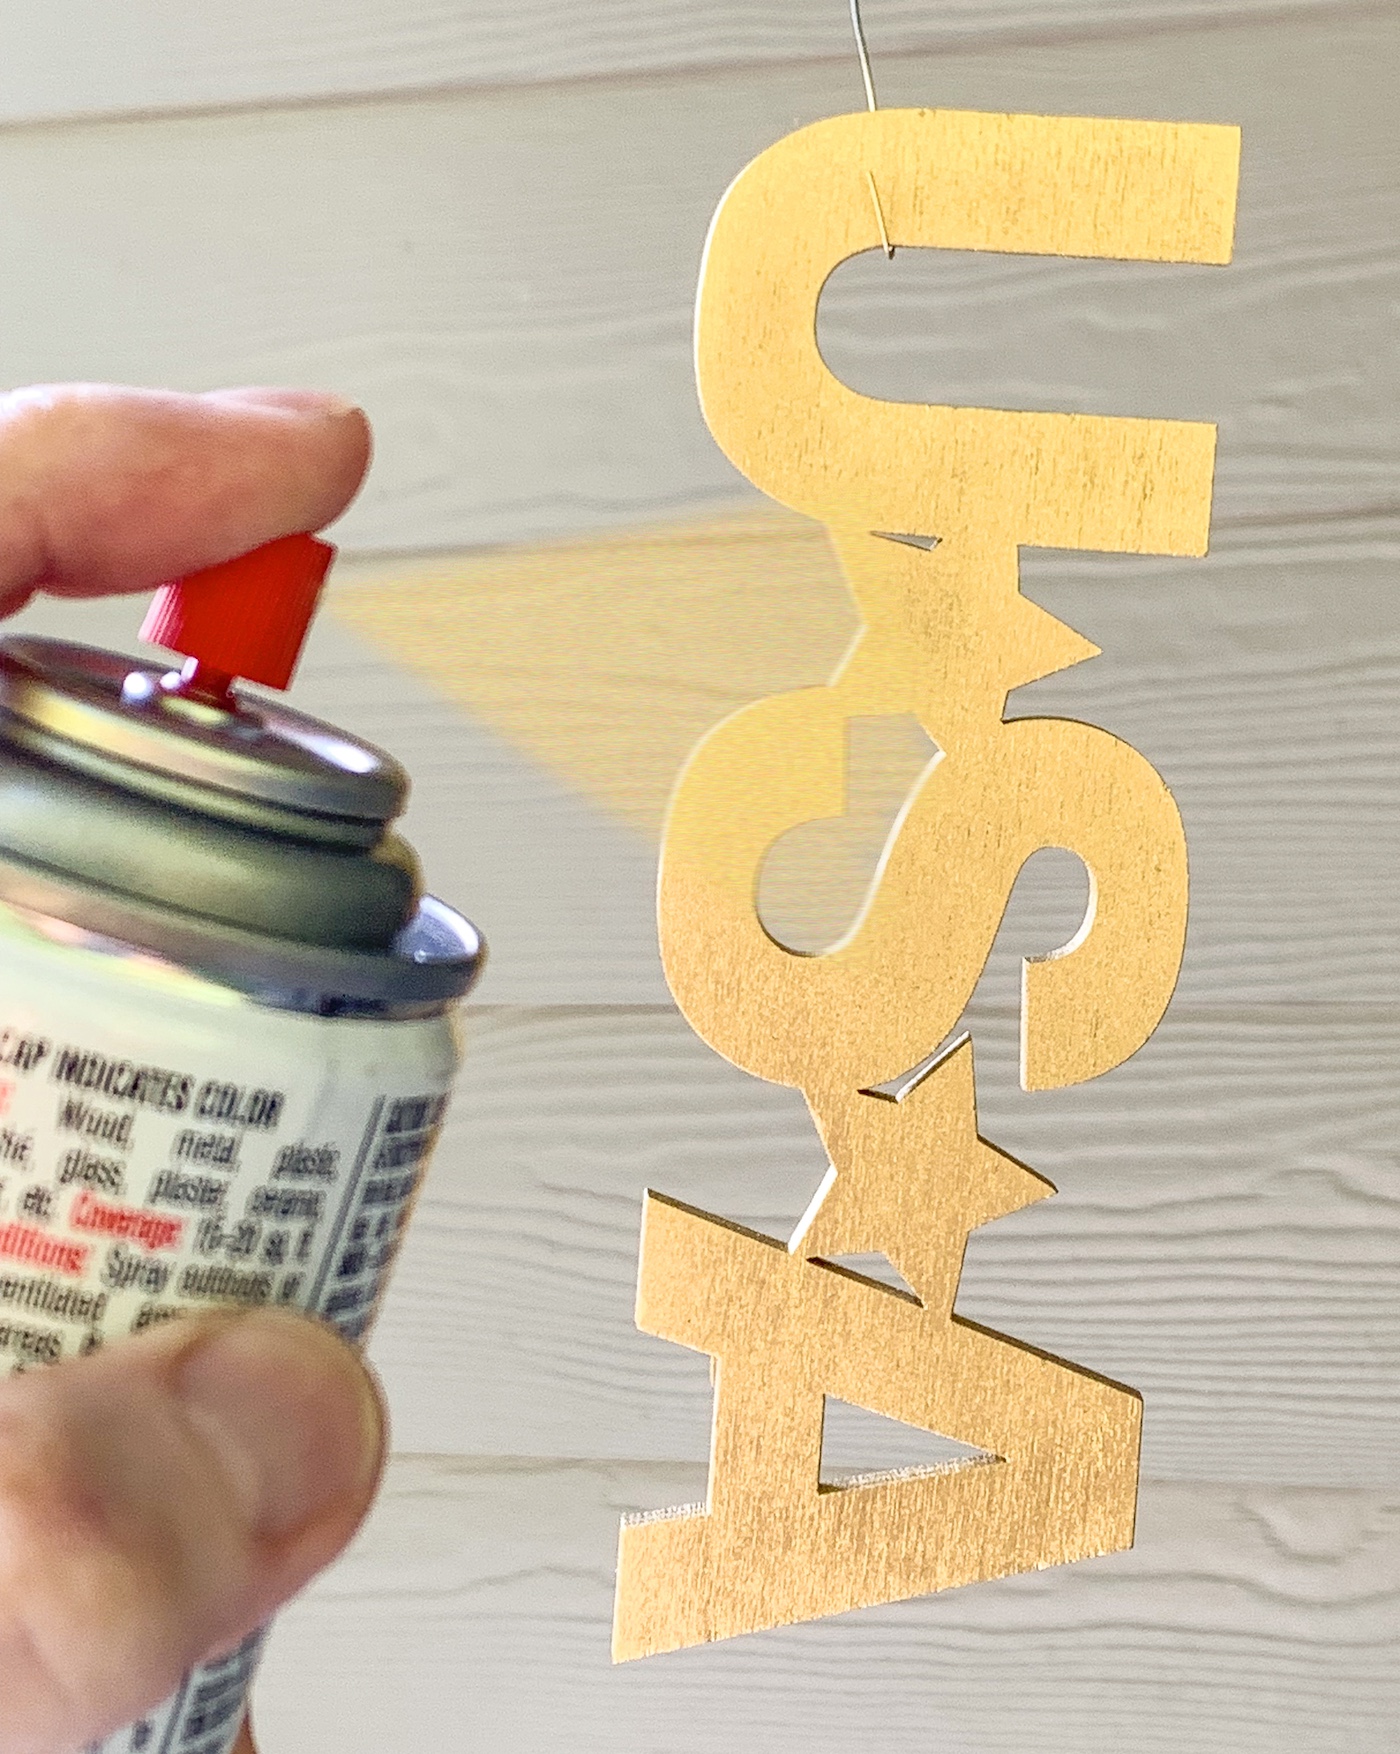 Spray painting the word USA with gold spray paint